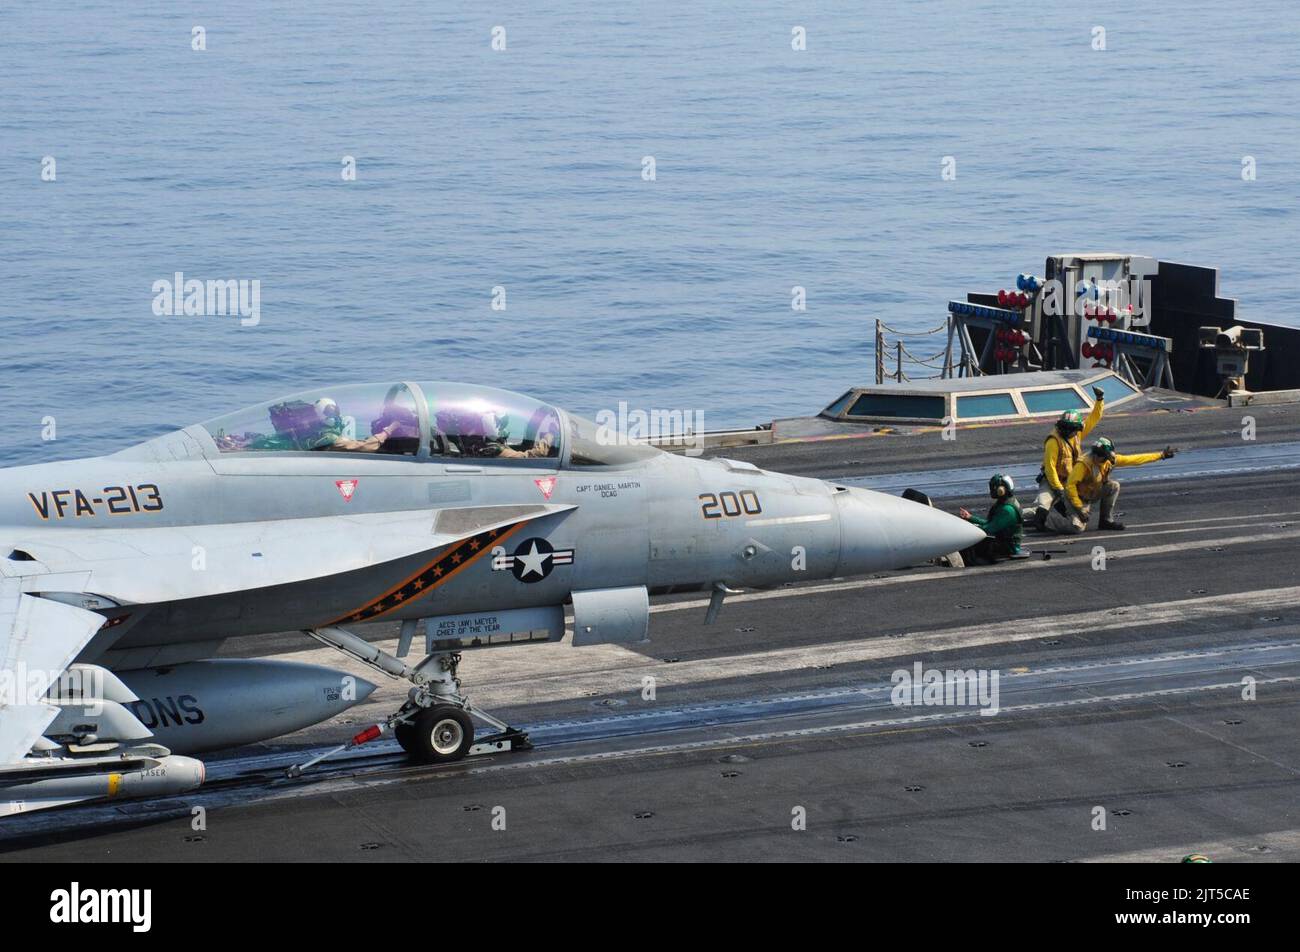 U.S. Sailors launch an F-A-18F Super Hornet aircraft assigned to Strike Fighter Squadron (VFA) 213 from the flight deck of the aircraft carrier USS George H.W. Bush (CVN 77) in the Persian Gulf Oct. 18, 2014, as Stock Photo